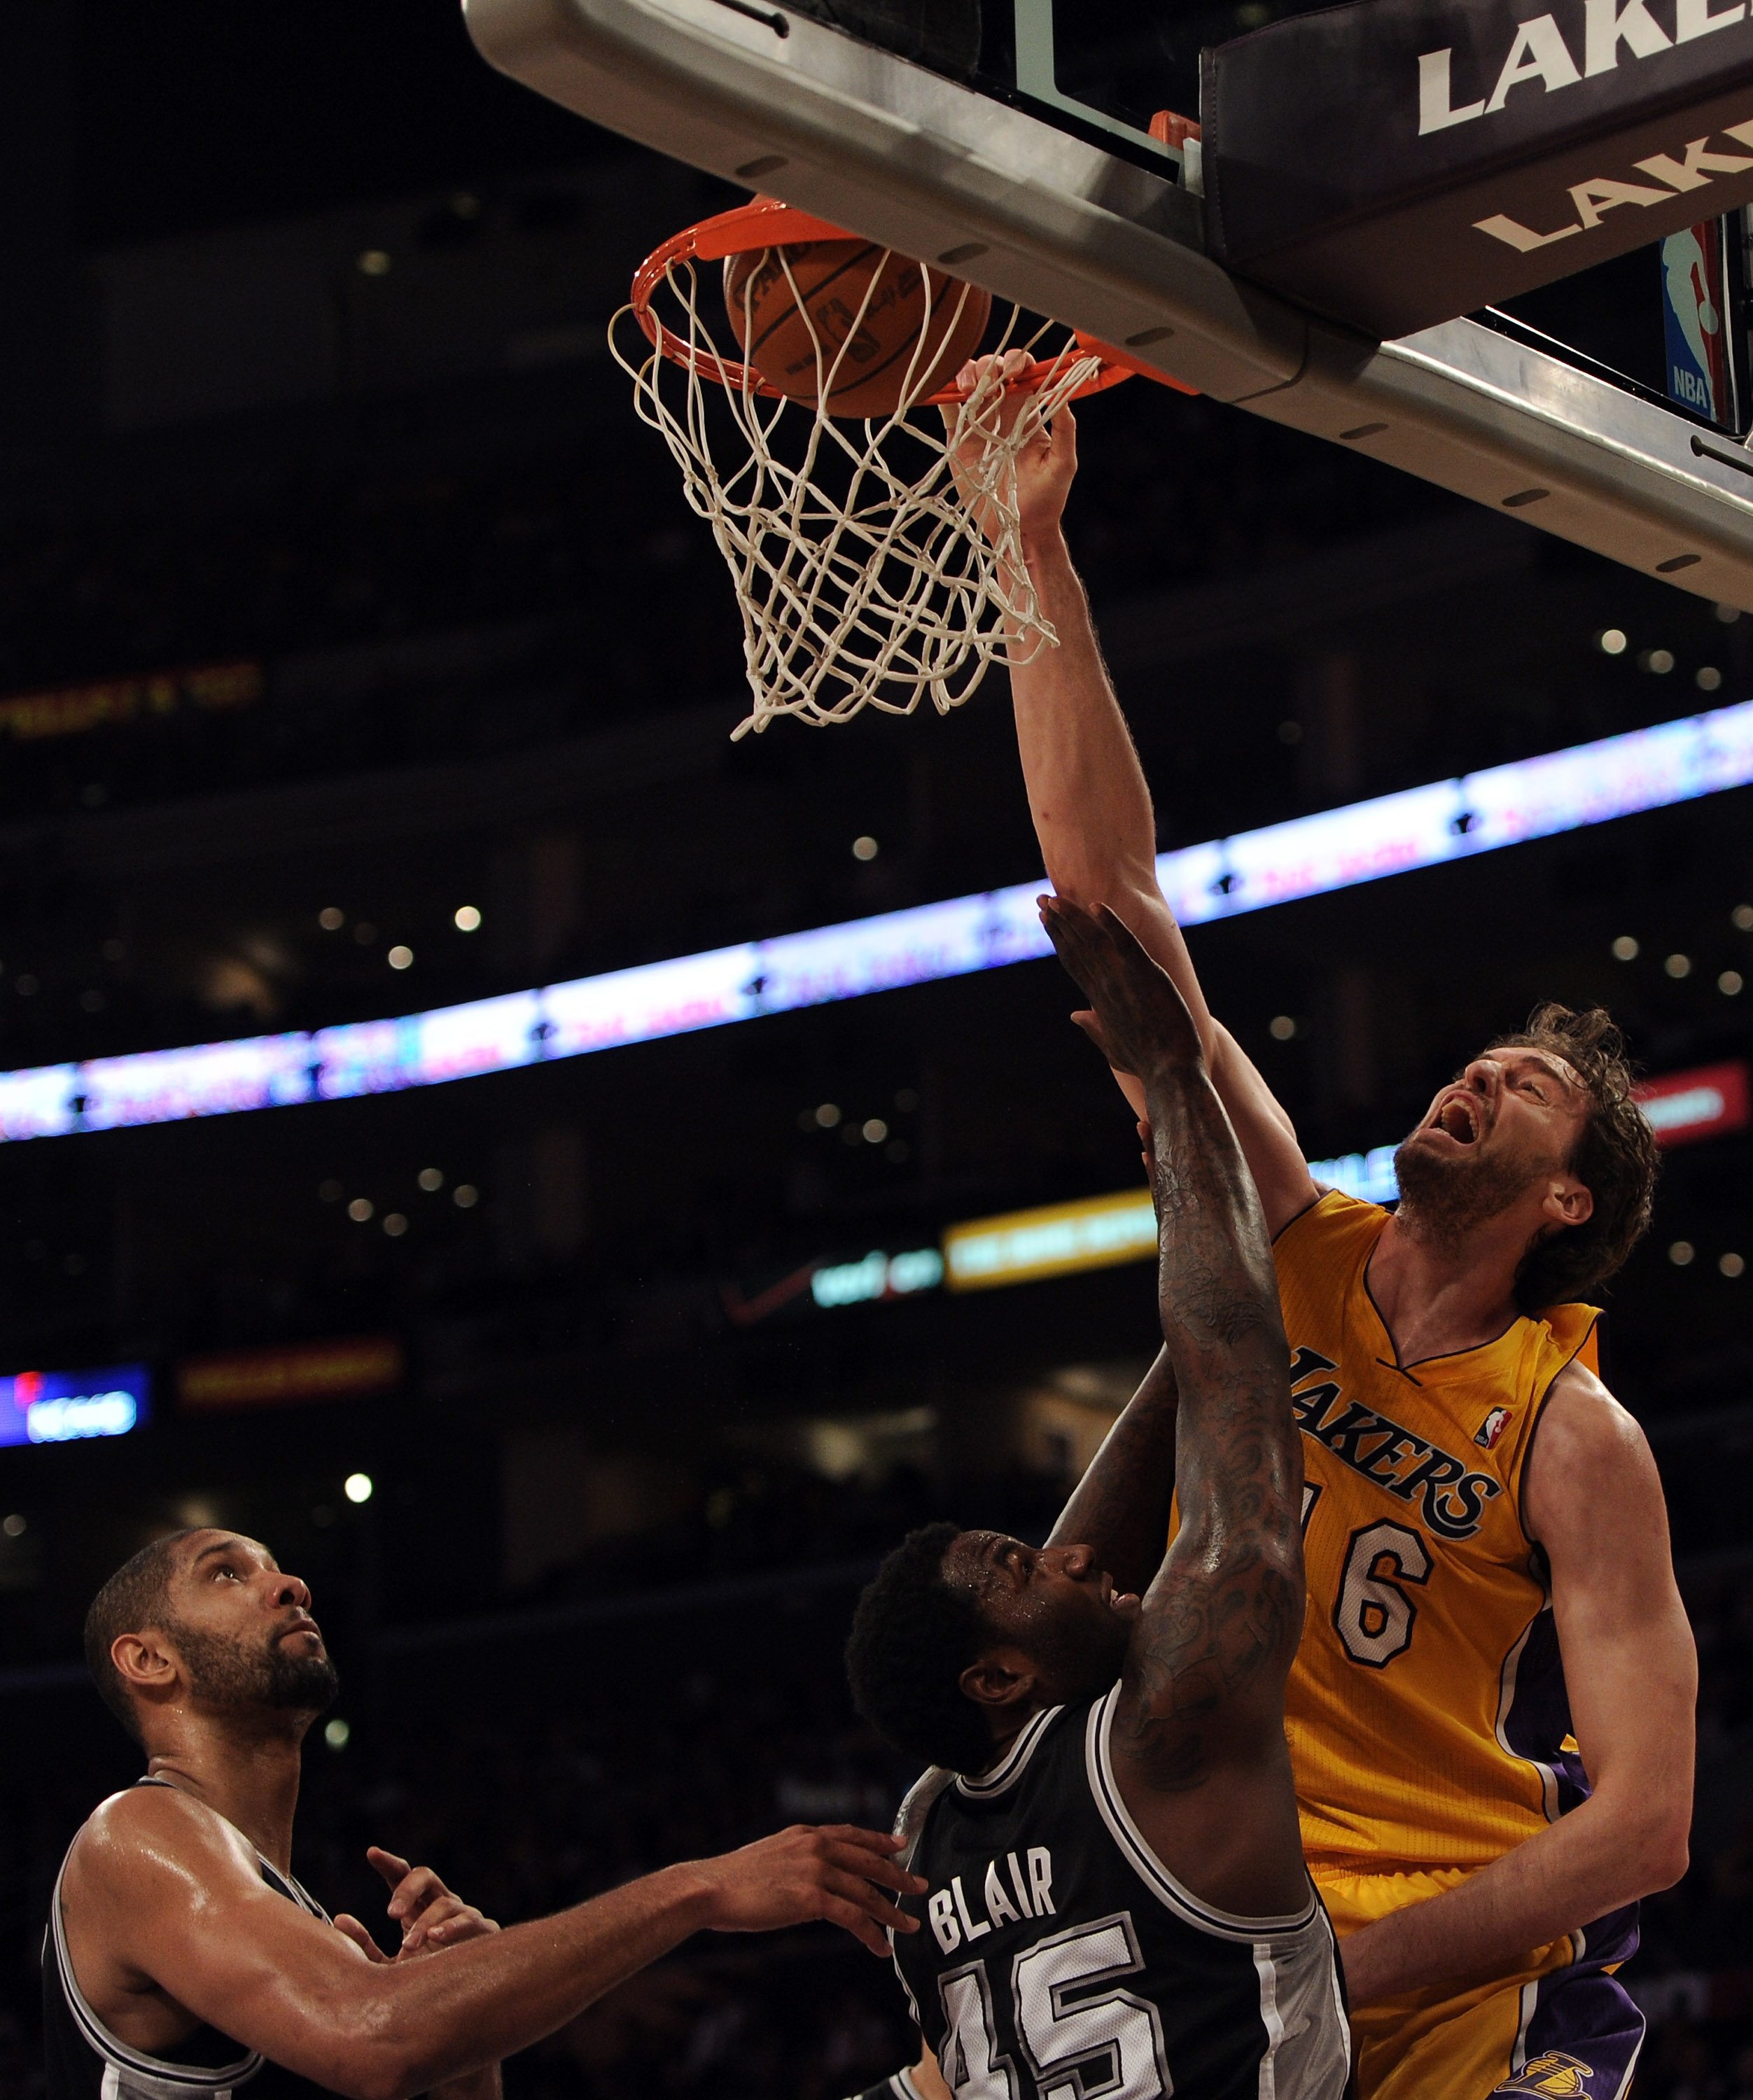 LOS ANGELES, CA - FEBRUARY 03:  Pau Gasol #16 of the Los Angeles Lakers dunks in front of DeJuan Blair #45 and Tim Duncan #21 of the San Antonio Spurs at Staples Center on February 3, 2011 in Los Angeles, California.  NOTE TO USER: User expressly acknowle